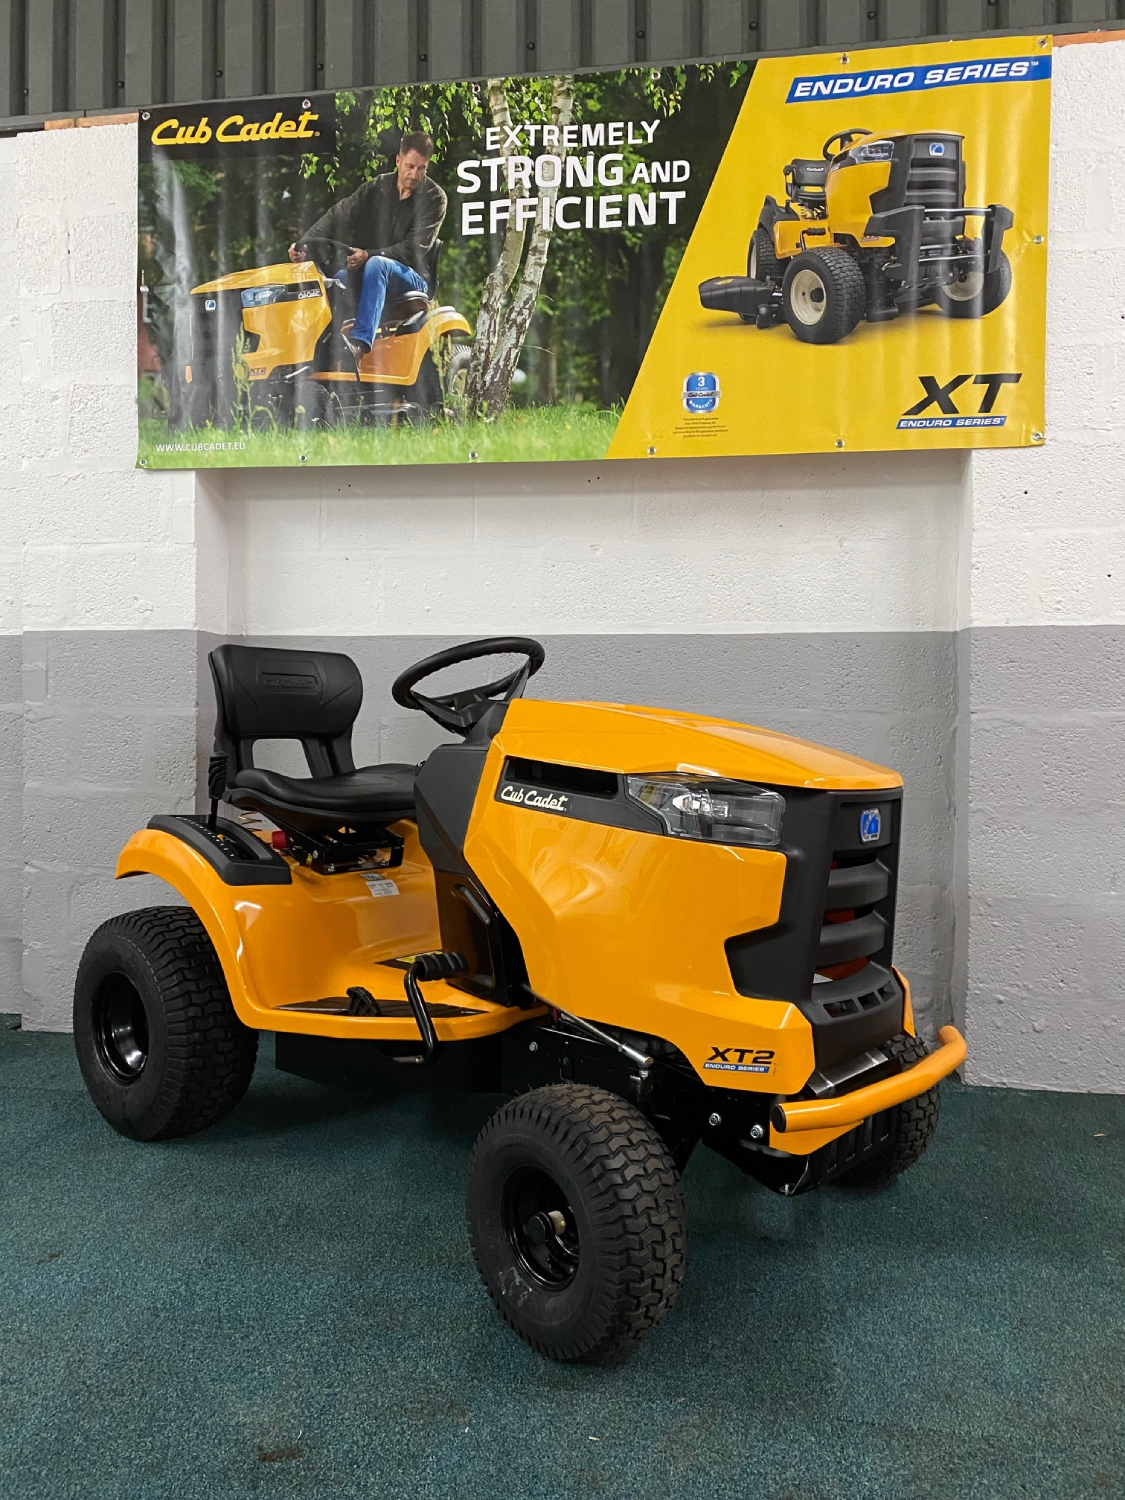 RIDE-ON LAWN MOWERS FOR SALE - LICHFIELD